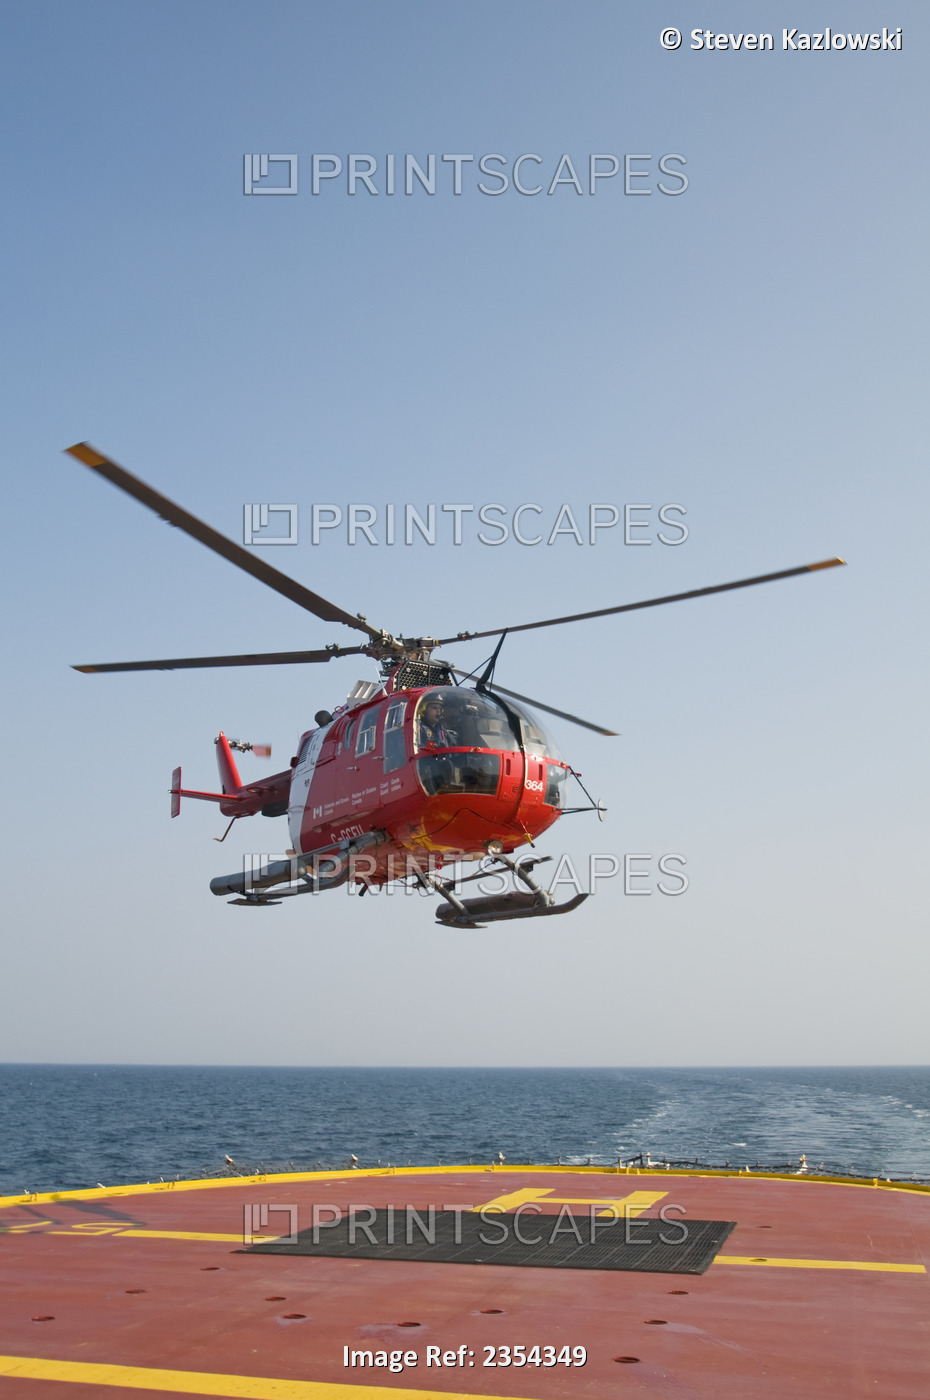 Canadian Coast Guard Helicopter From The Ccgs Amundsen, A Ship Used For ...